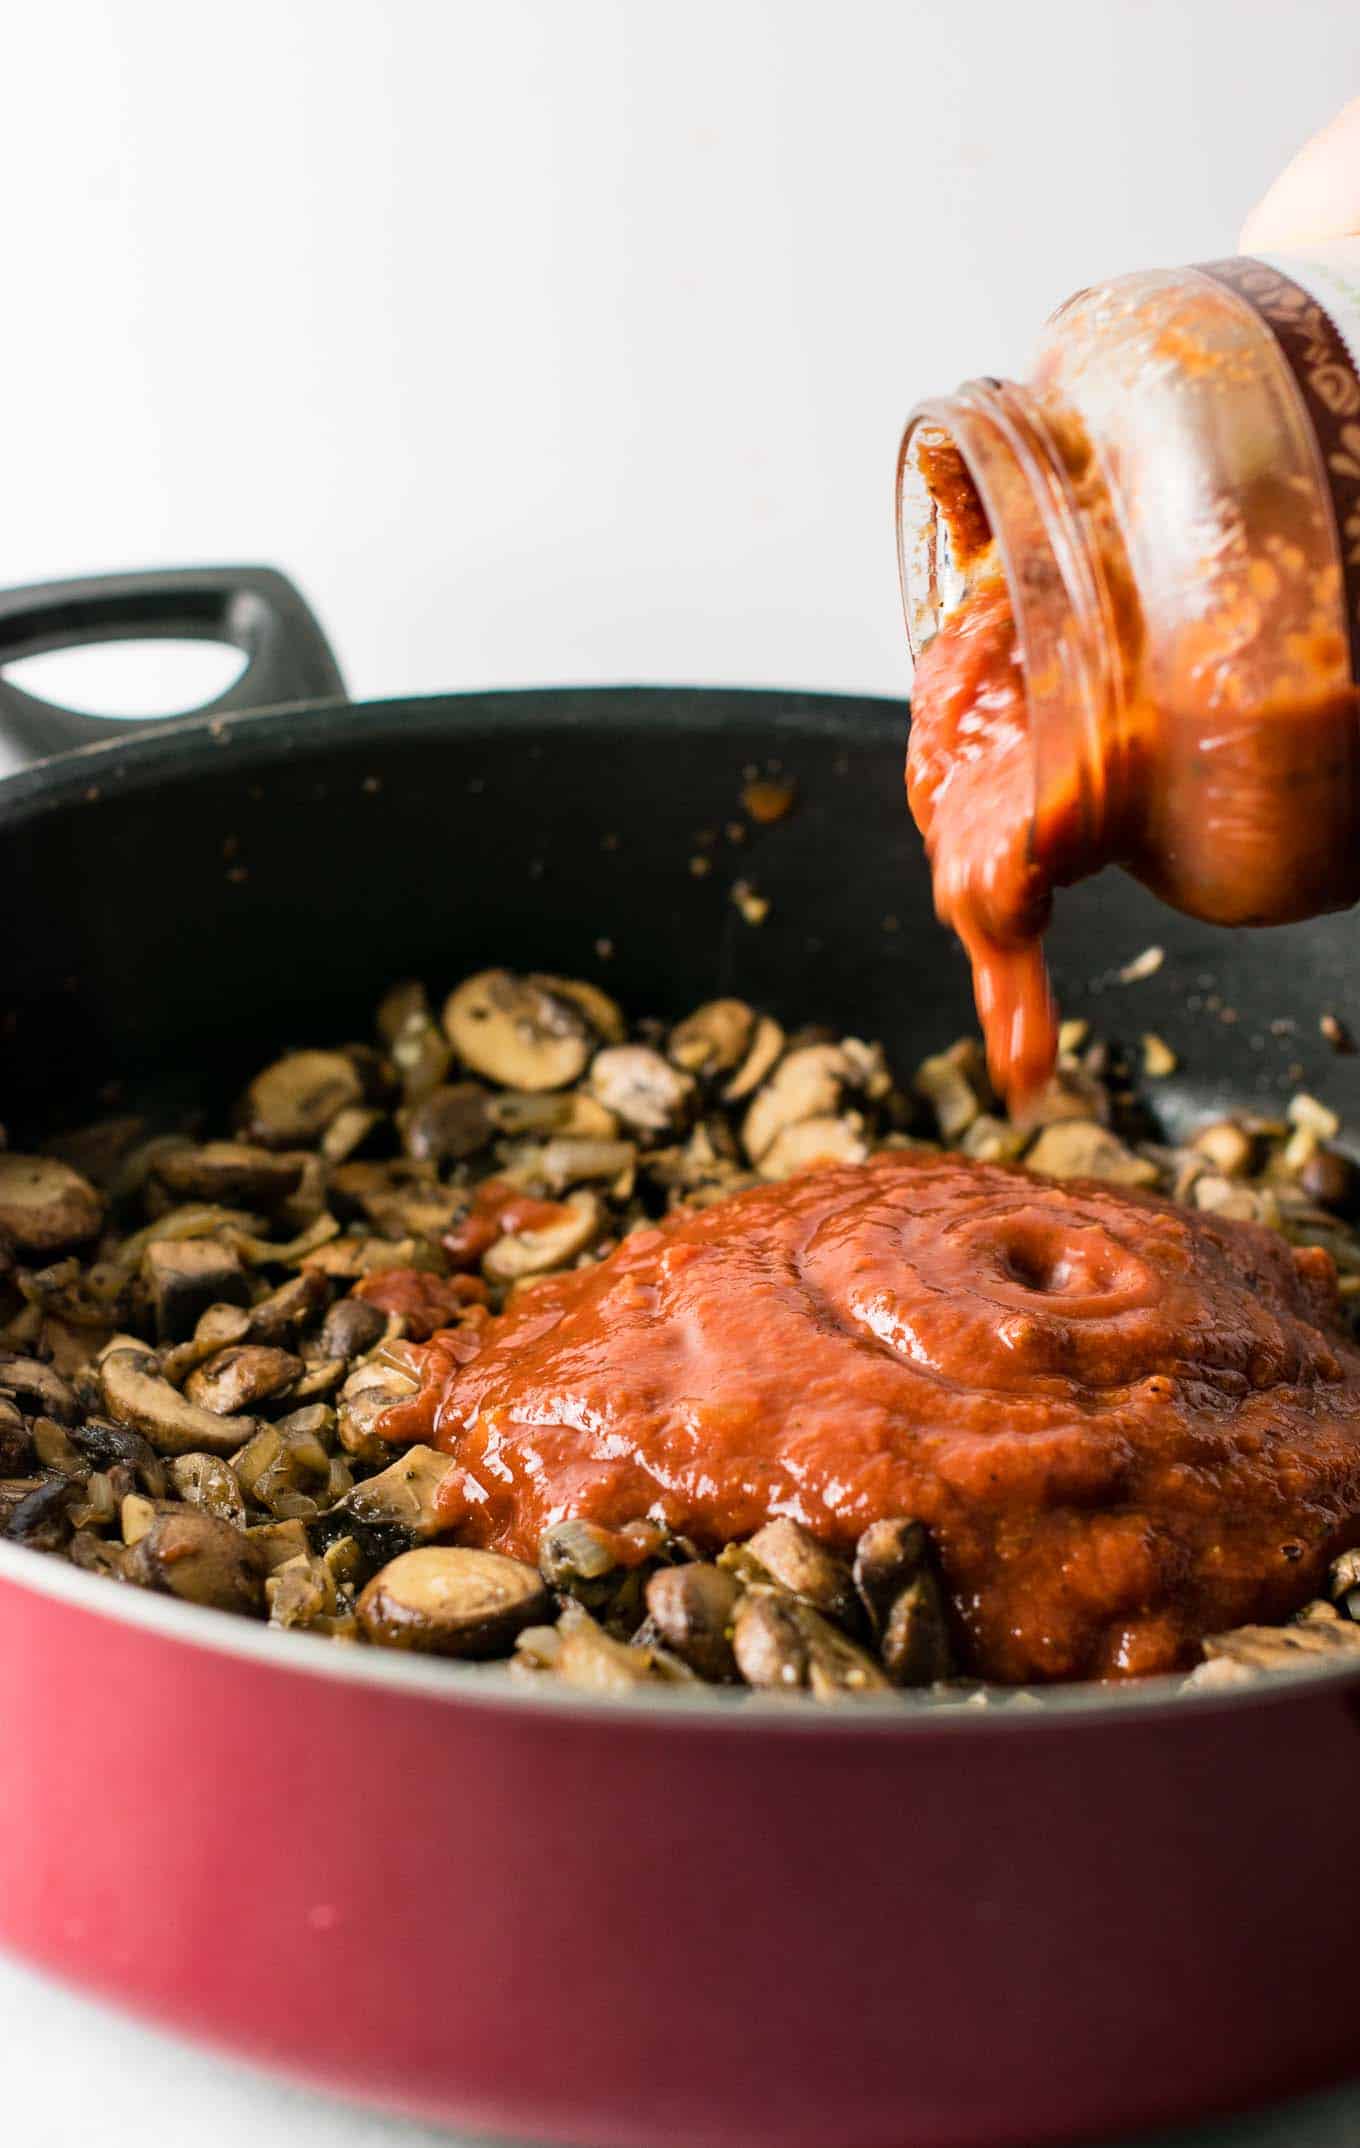 pasta sauce being poured into the skillet with the mushrooms